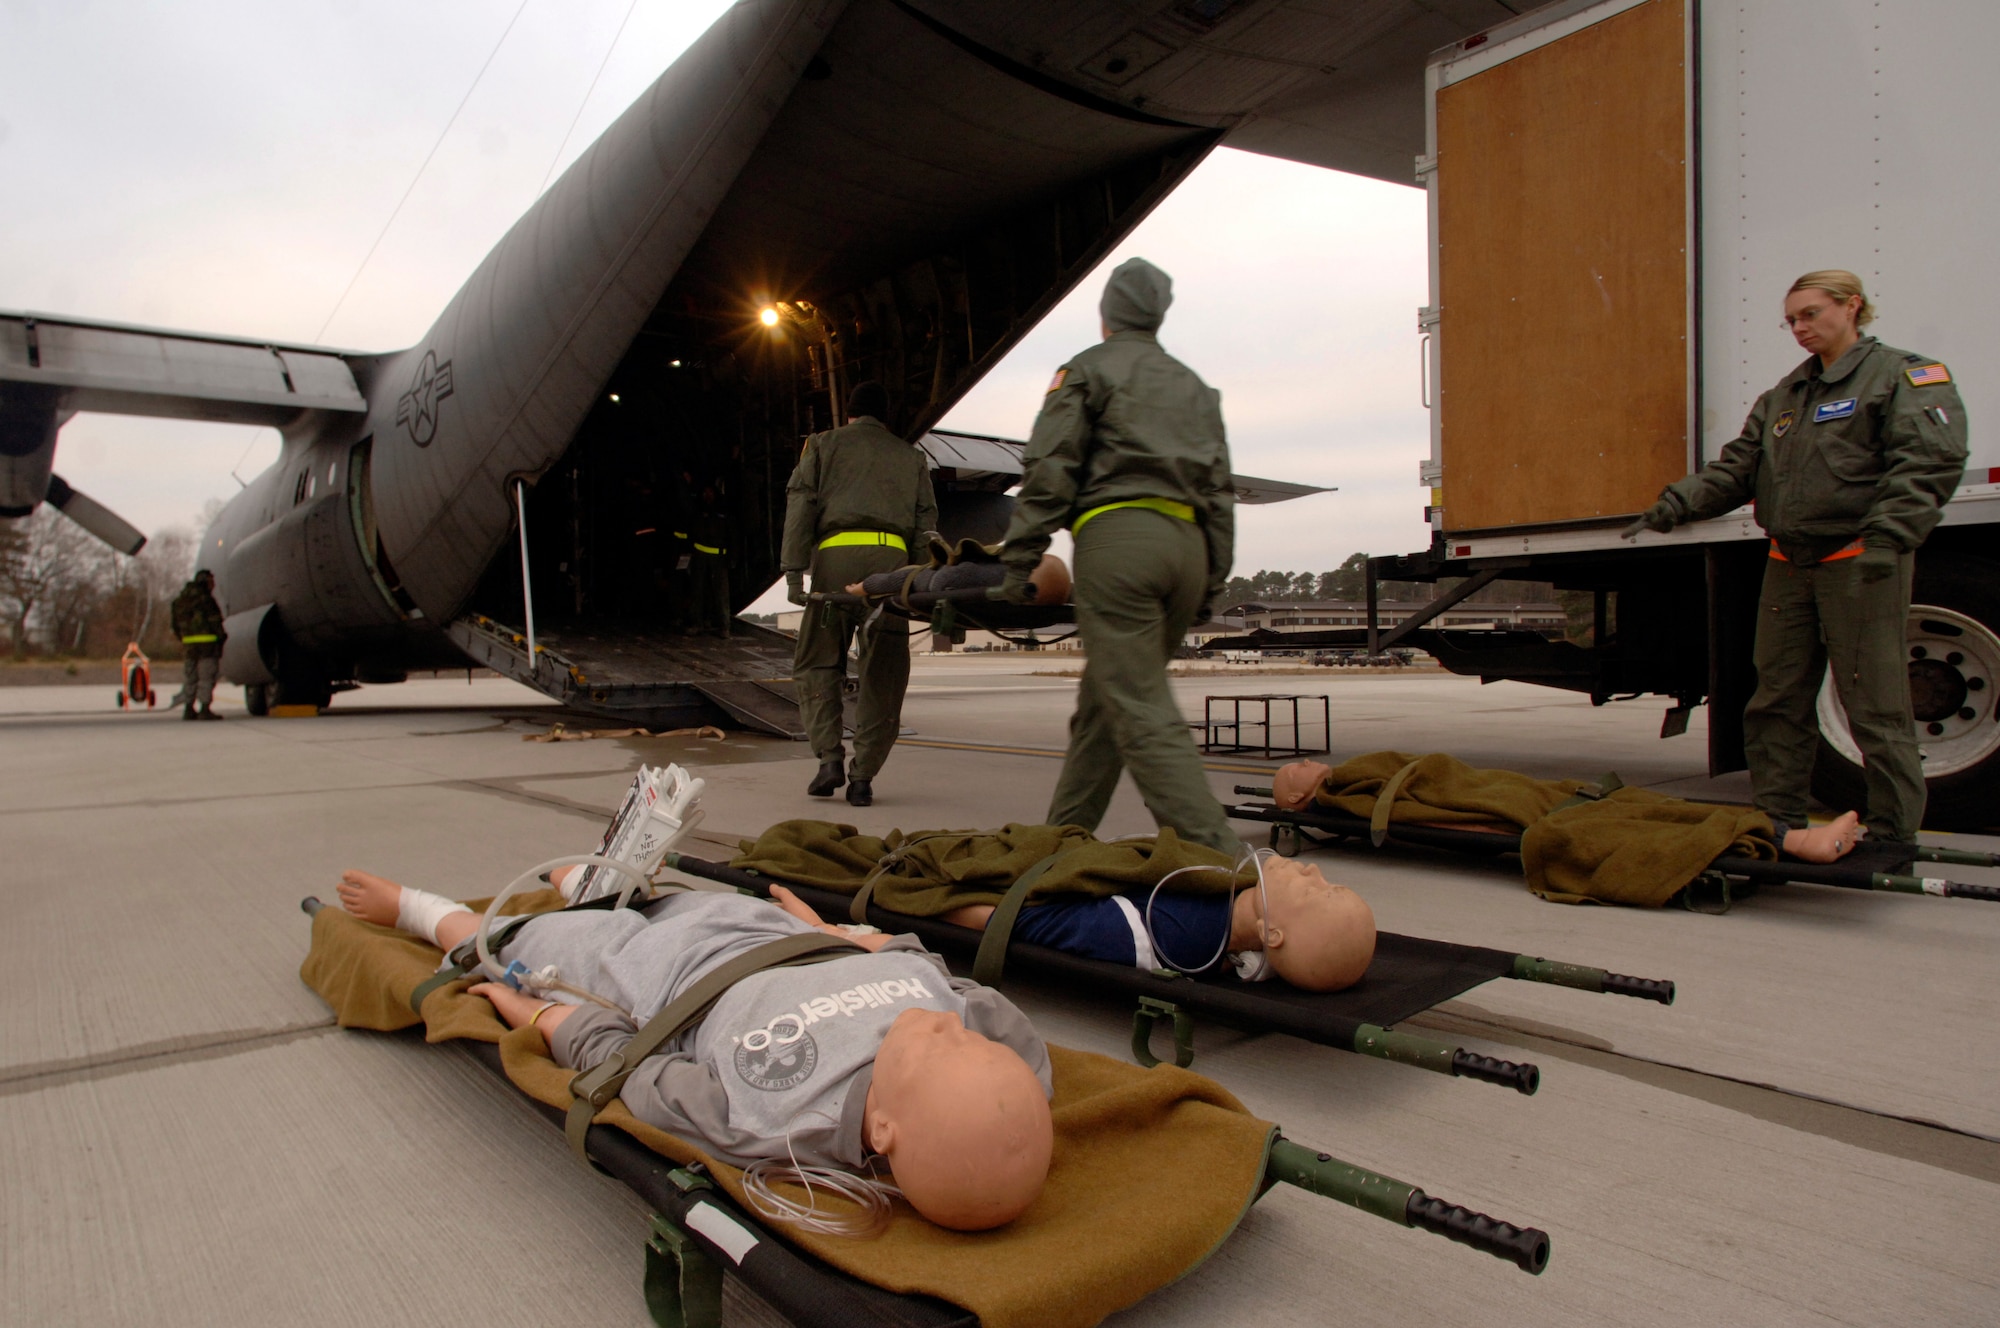 Flight nurses and medical technicians load 1,500 pounds of medical equipment and training mannequins into a C-130 at Ramstein Air Base shortly before takeoff on a weekly recurring training sortie for personnel assigned to the 86th Aeromedical Evacuation Squadron. The flight-qualified healthcare providers fly with the 37th Airlift Squadron to remain proficient in their skills.  (Department of Defense photo by Master Sgt. Scott Wagers)